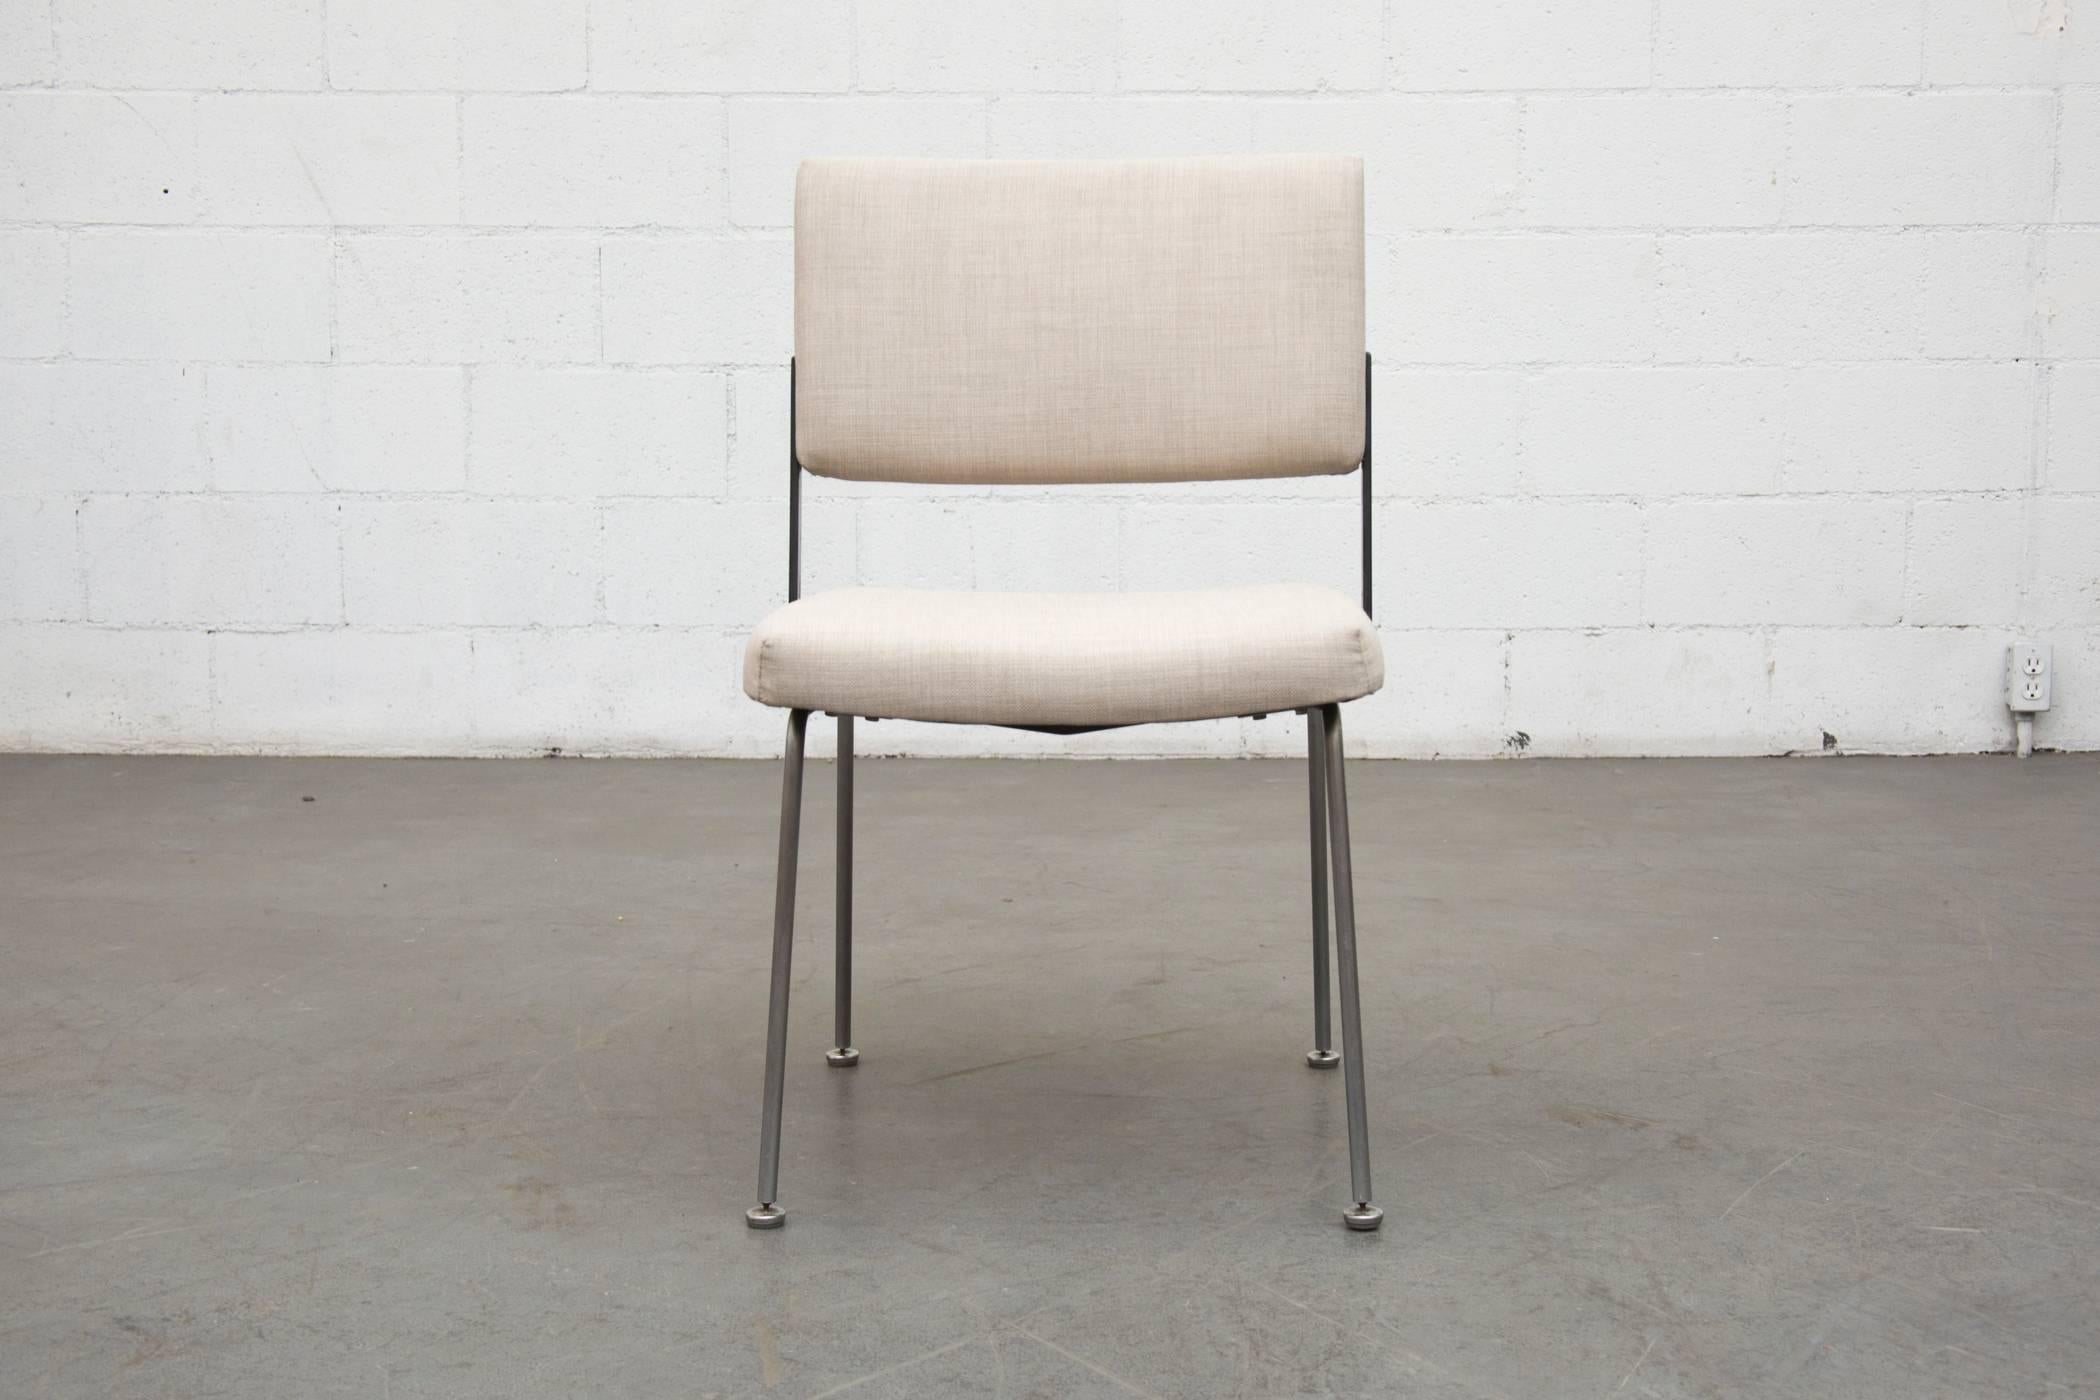 Great architectural chair newly upholstered in dove grey fabric with wide body, black enameled metal Frame and brushed steel legs. Set price. Frame is in original condition with some wear consistent with age and use.